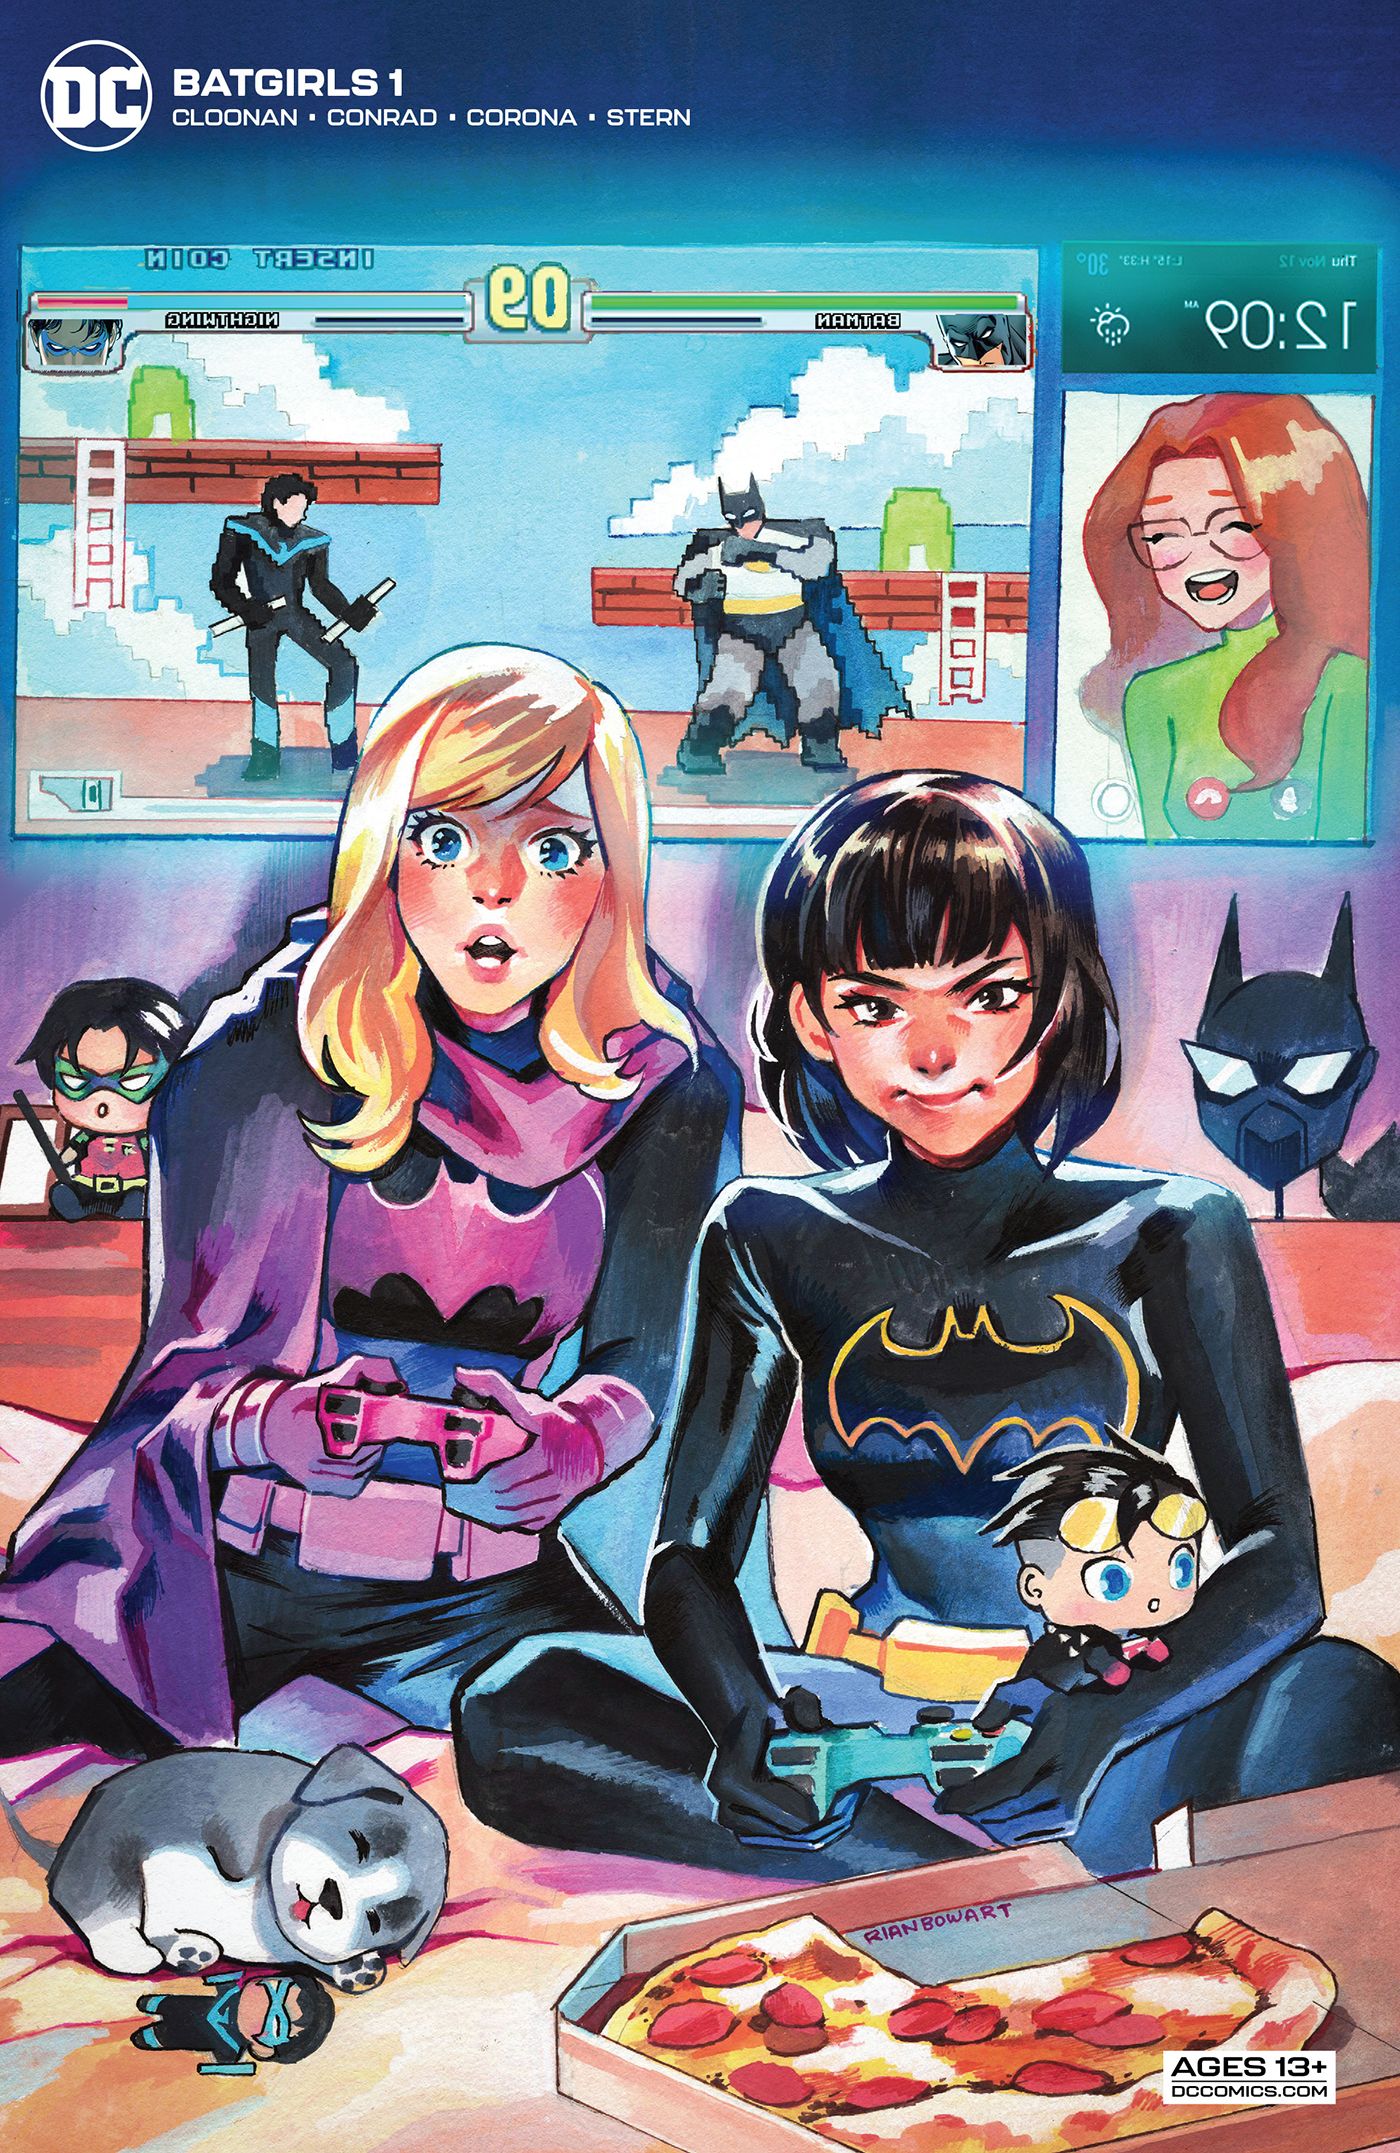 Stephanie Brown and Cassandra Cain play video games on a variant cover for Batgirls #1.